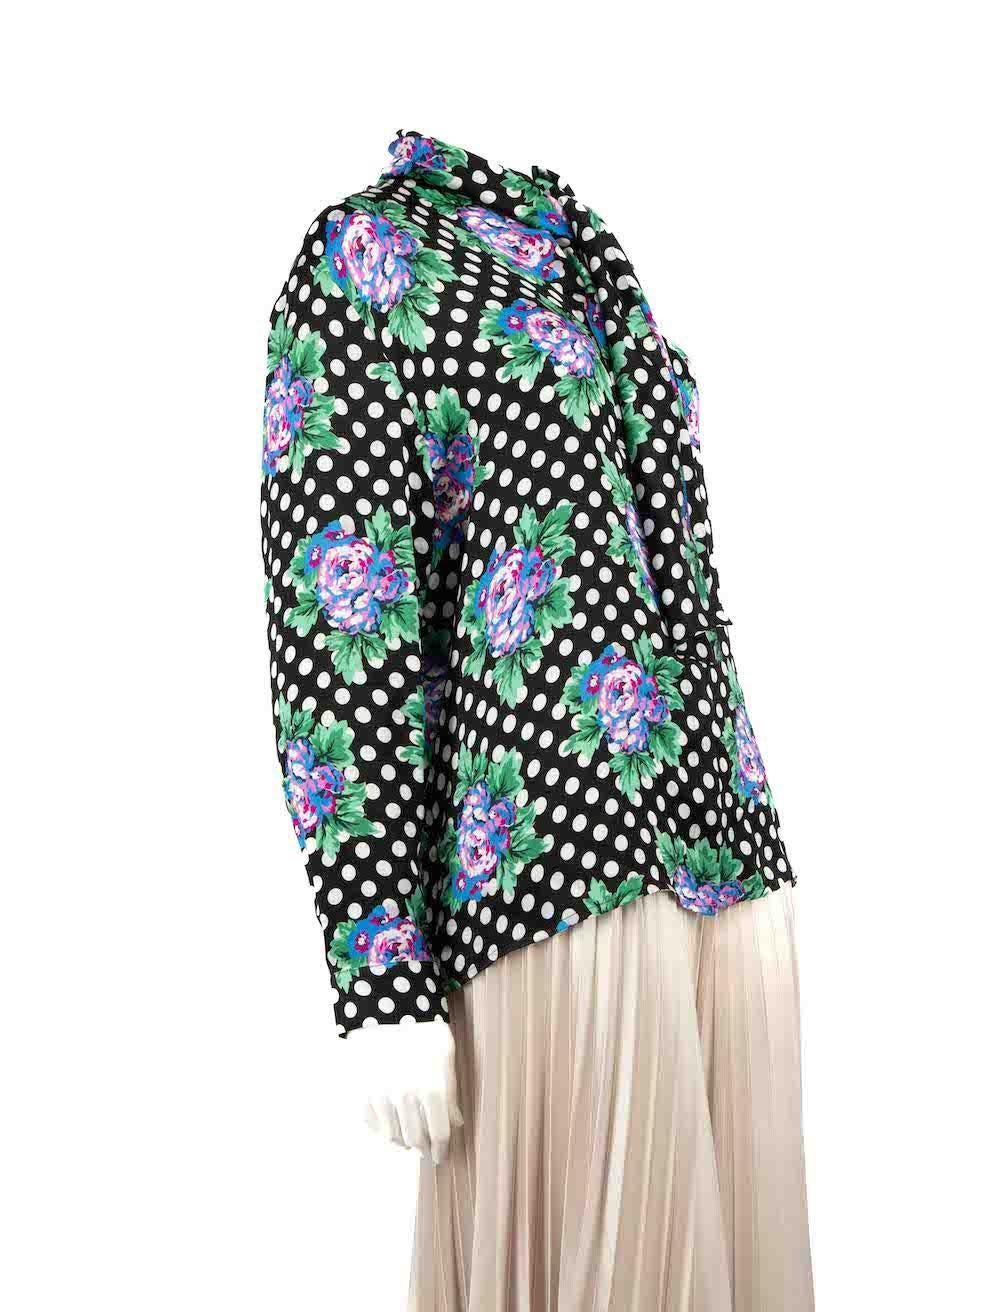 CONDITION is Very good. Minimal wear to blouse is evident. Minimal wear to the front, back and sleeves with pulls and plucks to the weave on this used Balenciaga designer resale item.
 
Details
Multicolour - black, white, green and